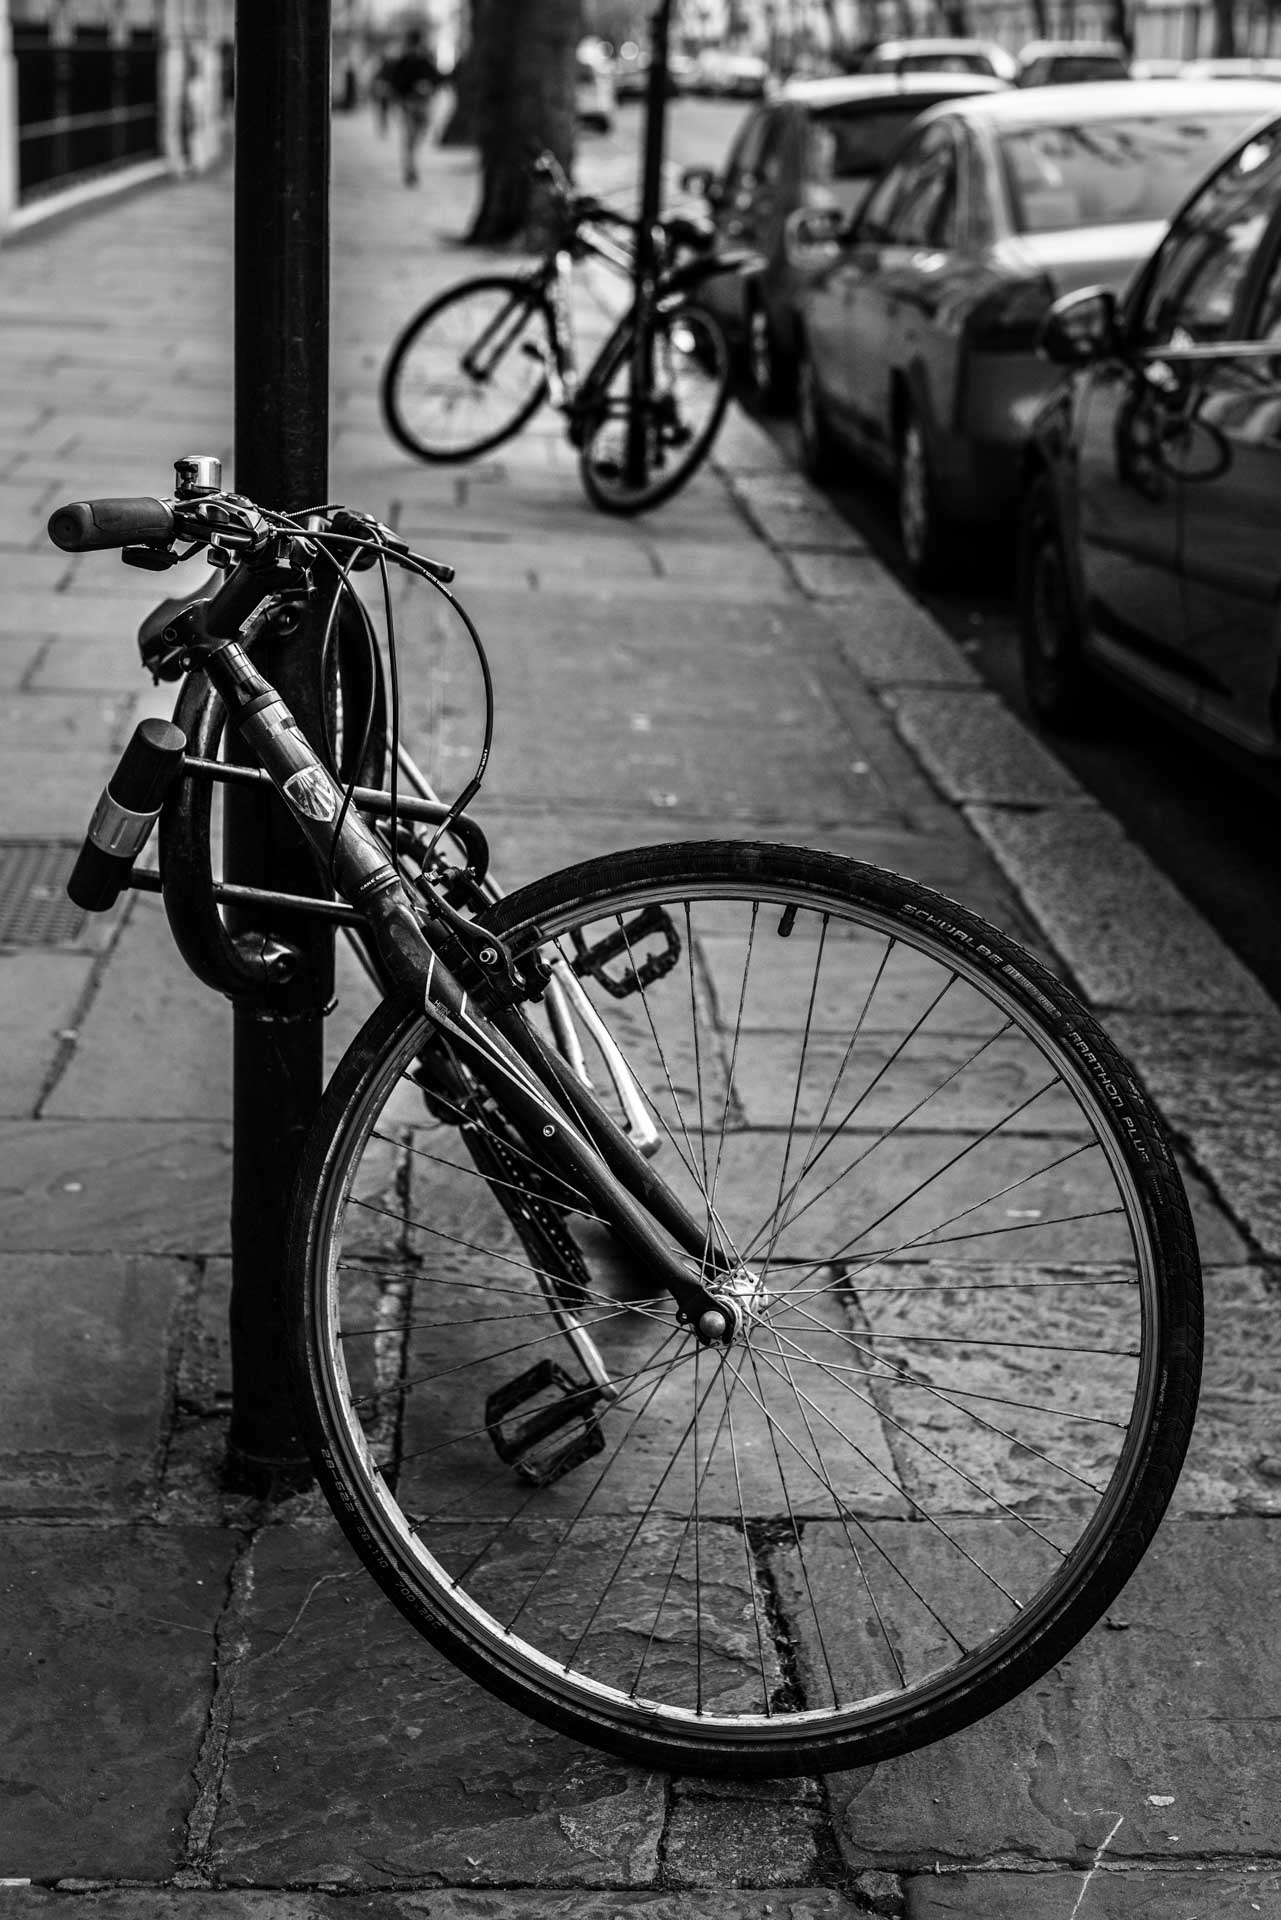 Chained bicycles, Streets, london photography, street photographers, tempest photography, tumblr photography, photography